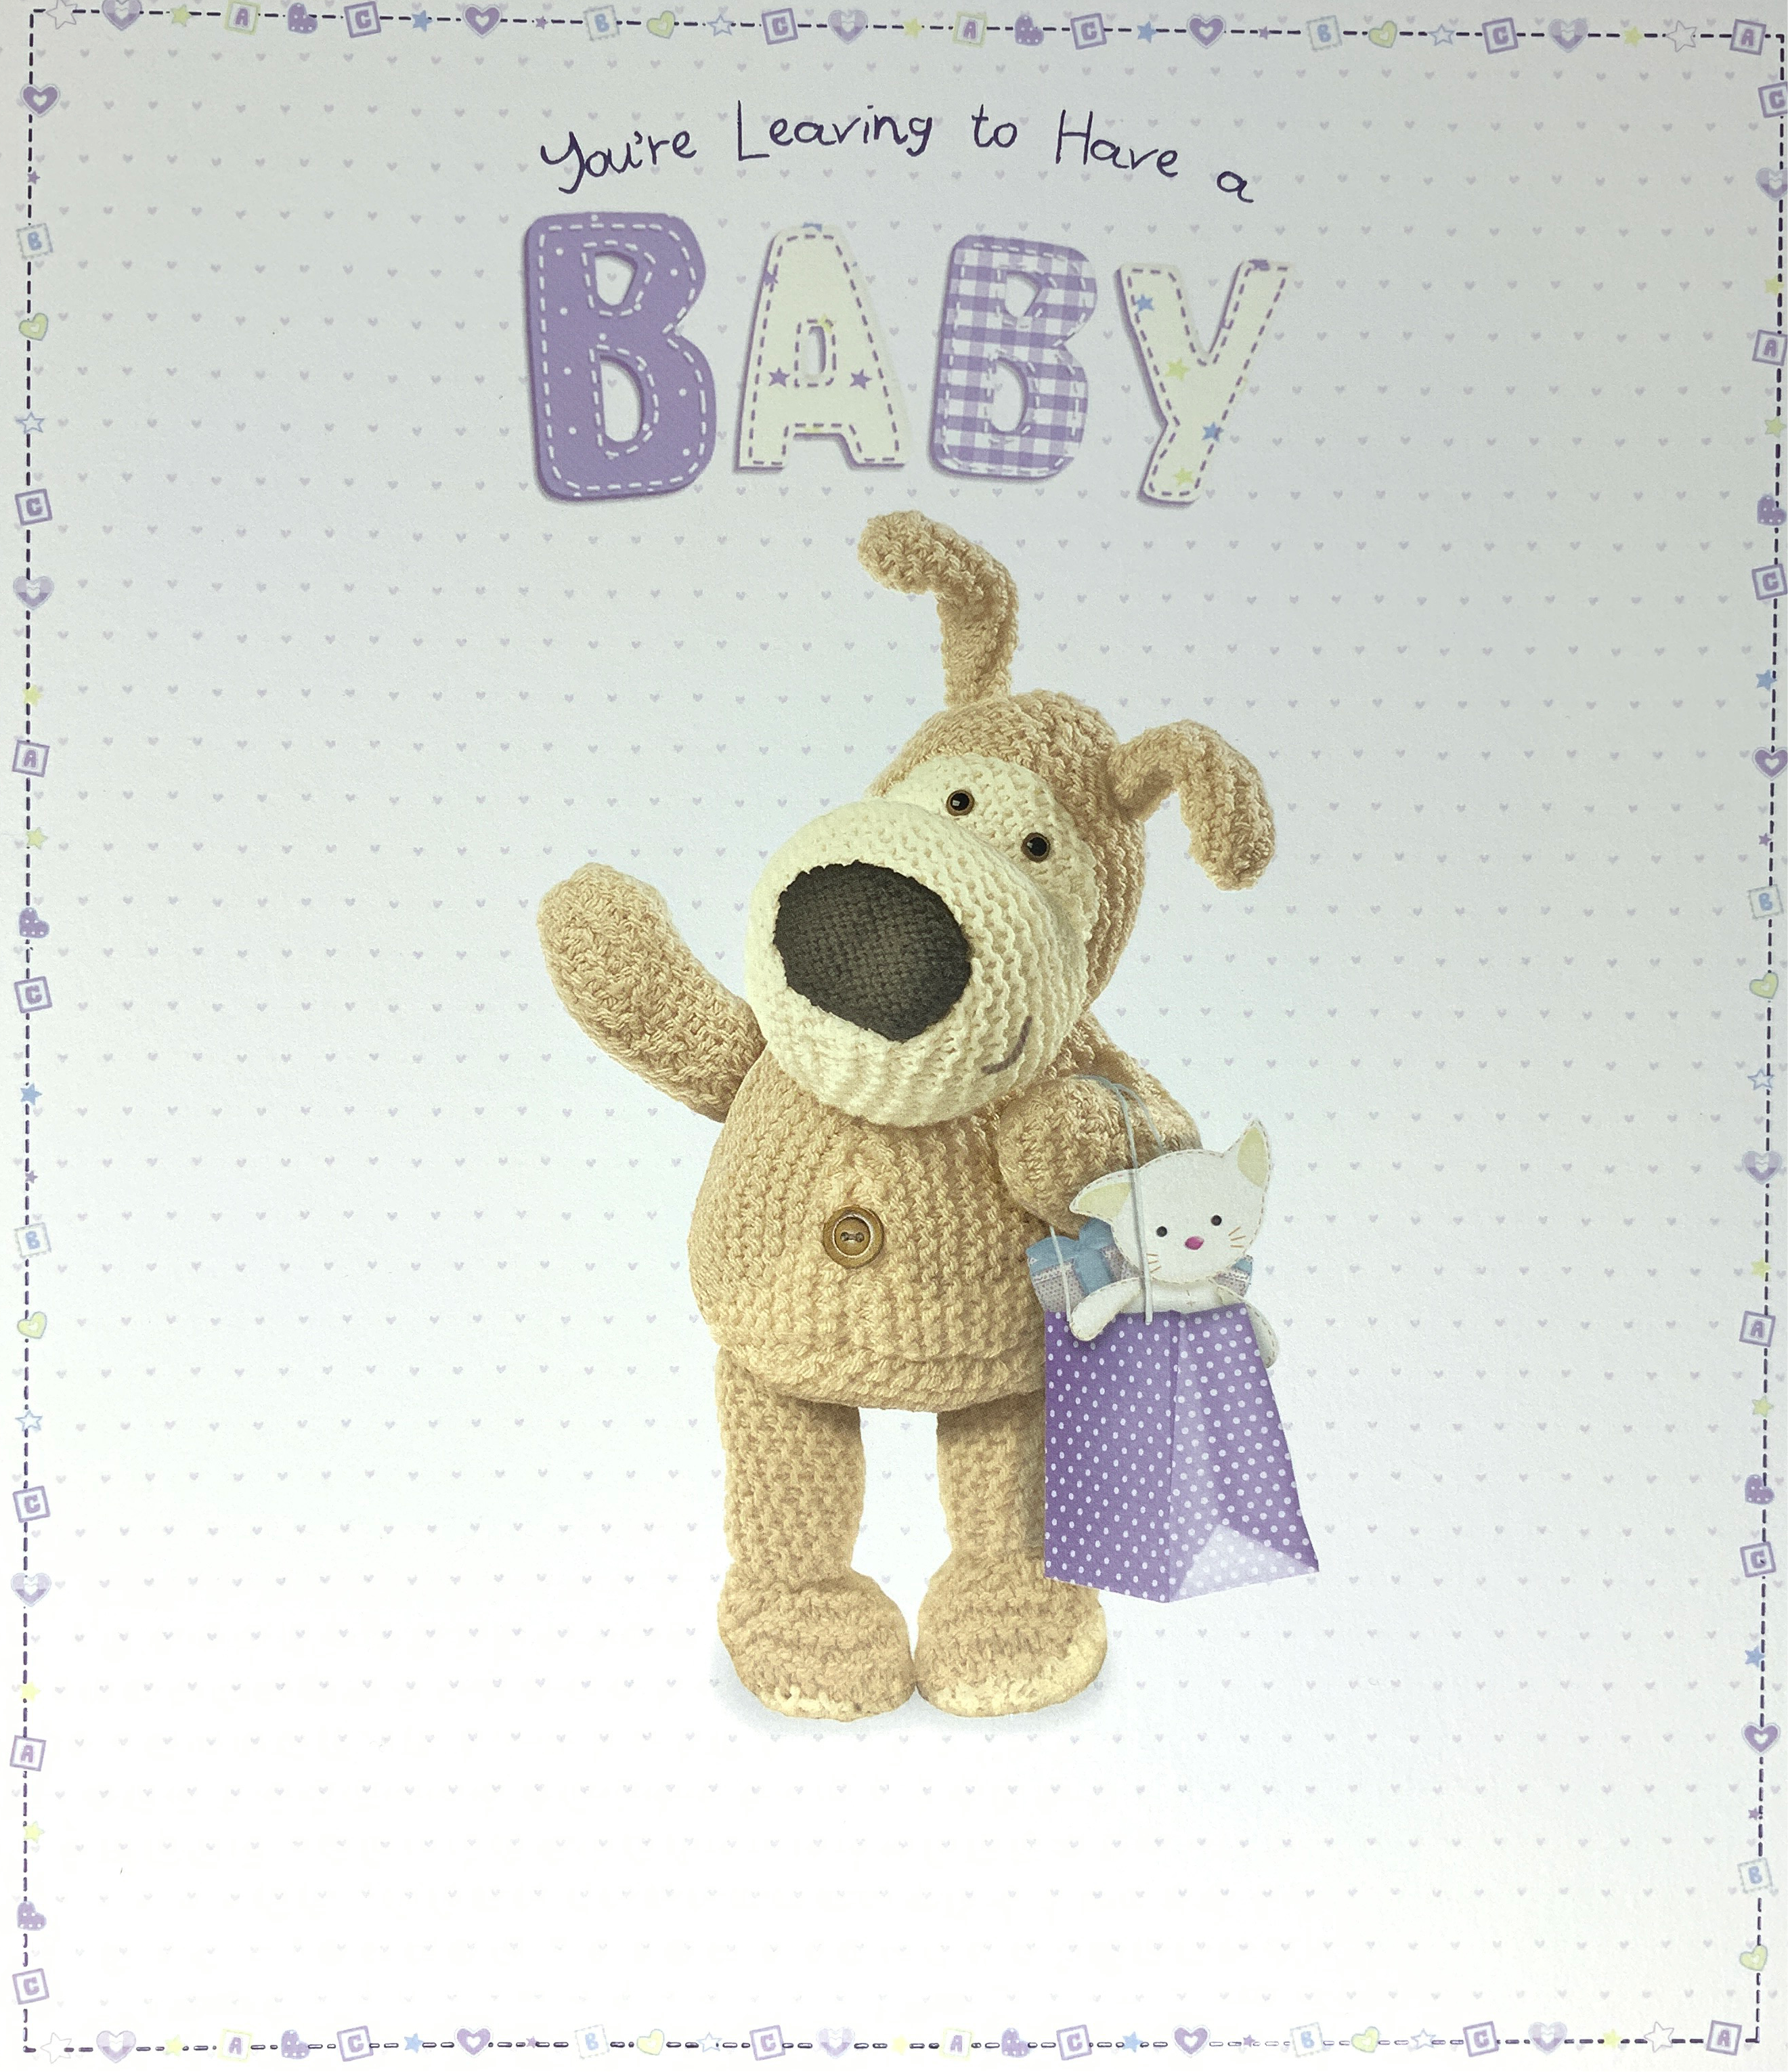 New Baby Card - Cute Teddy Is Waving ( Large )